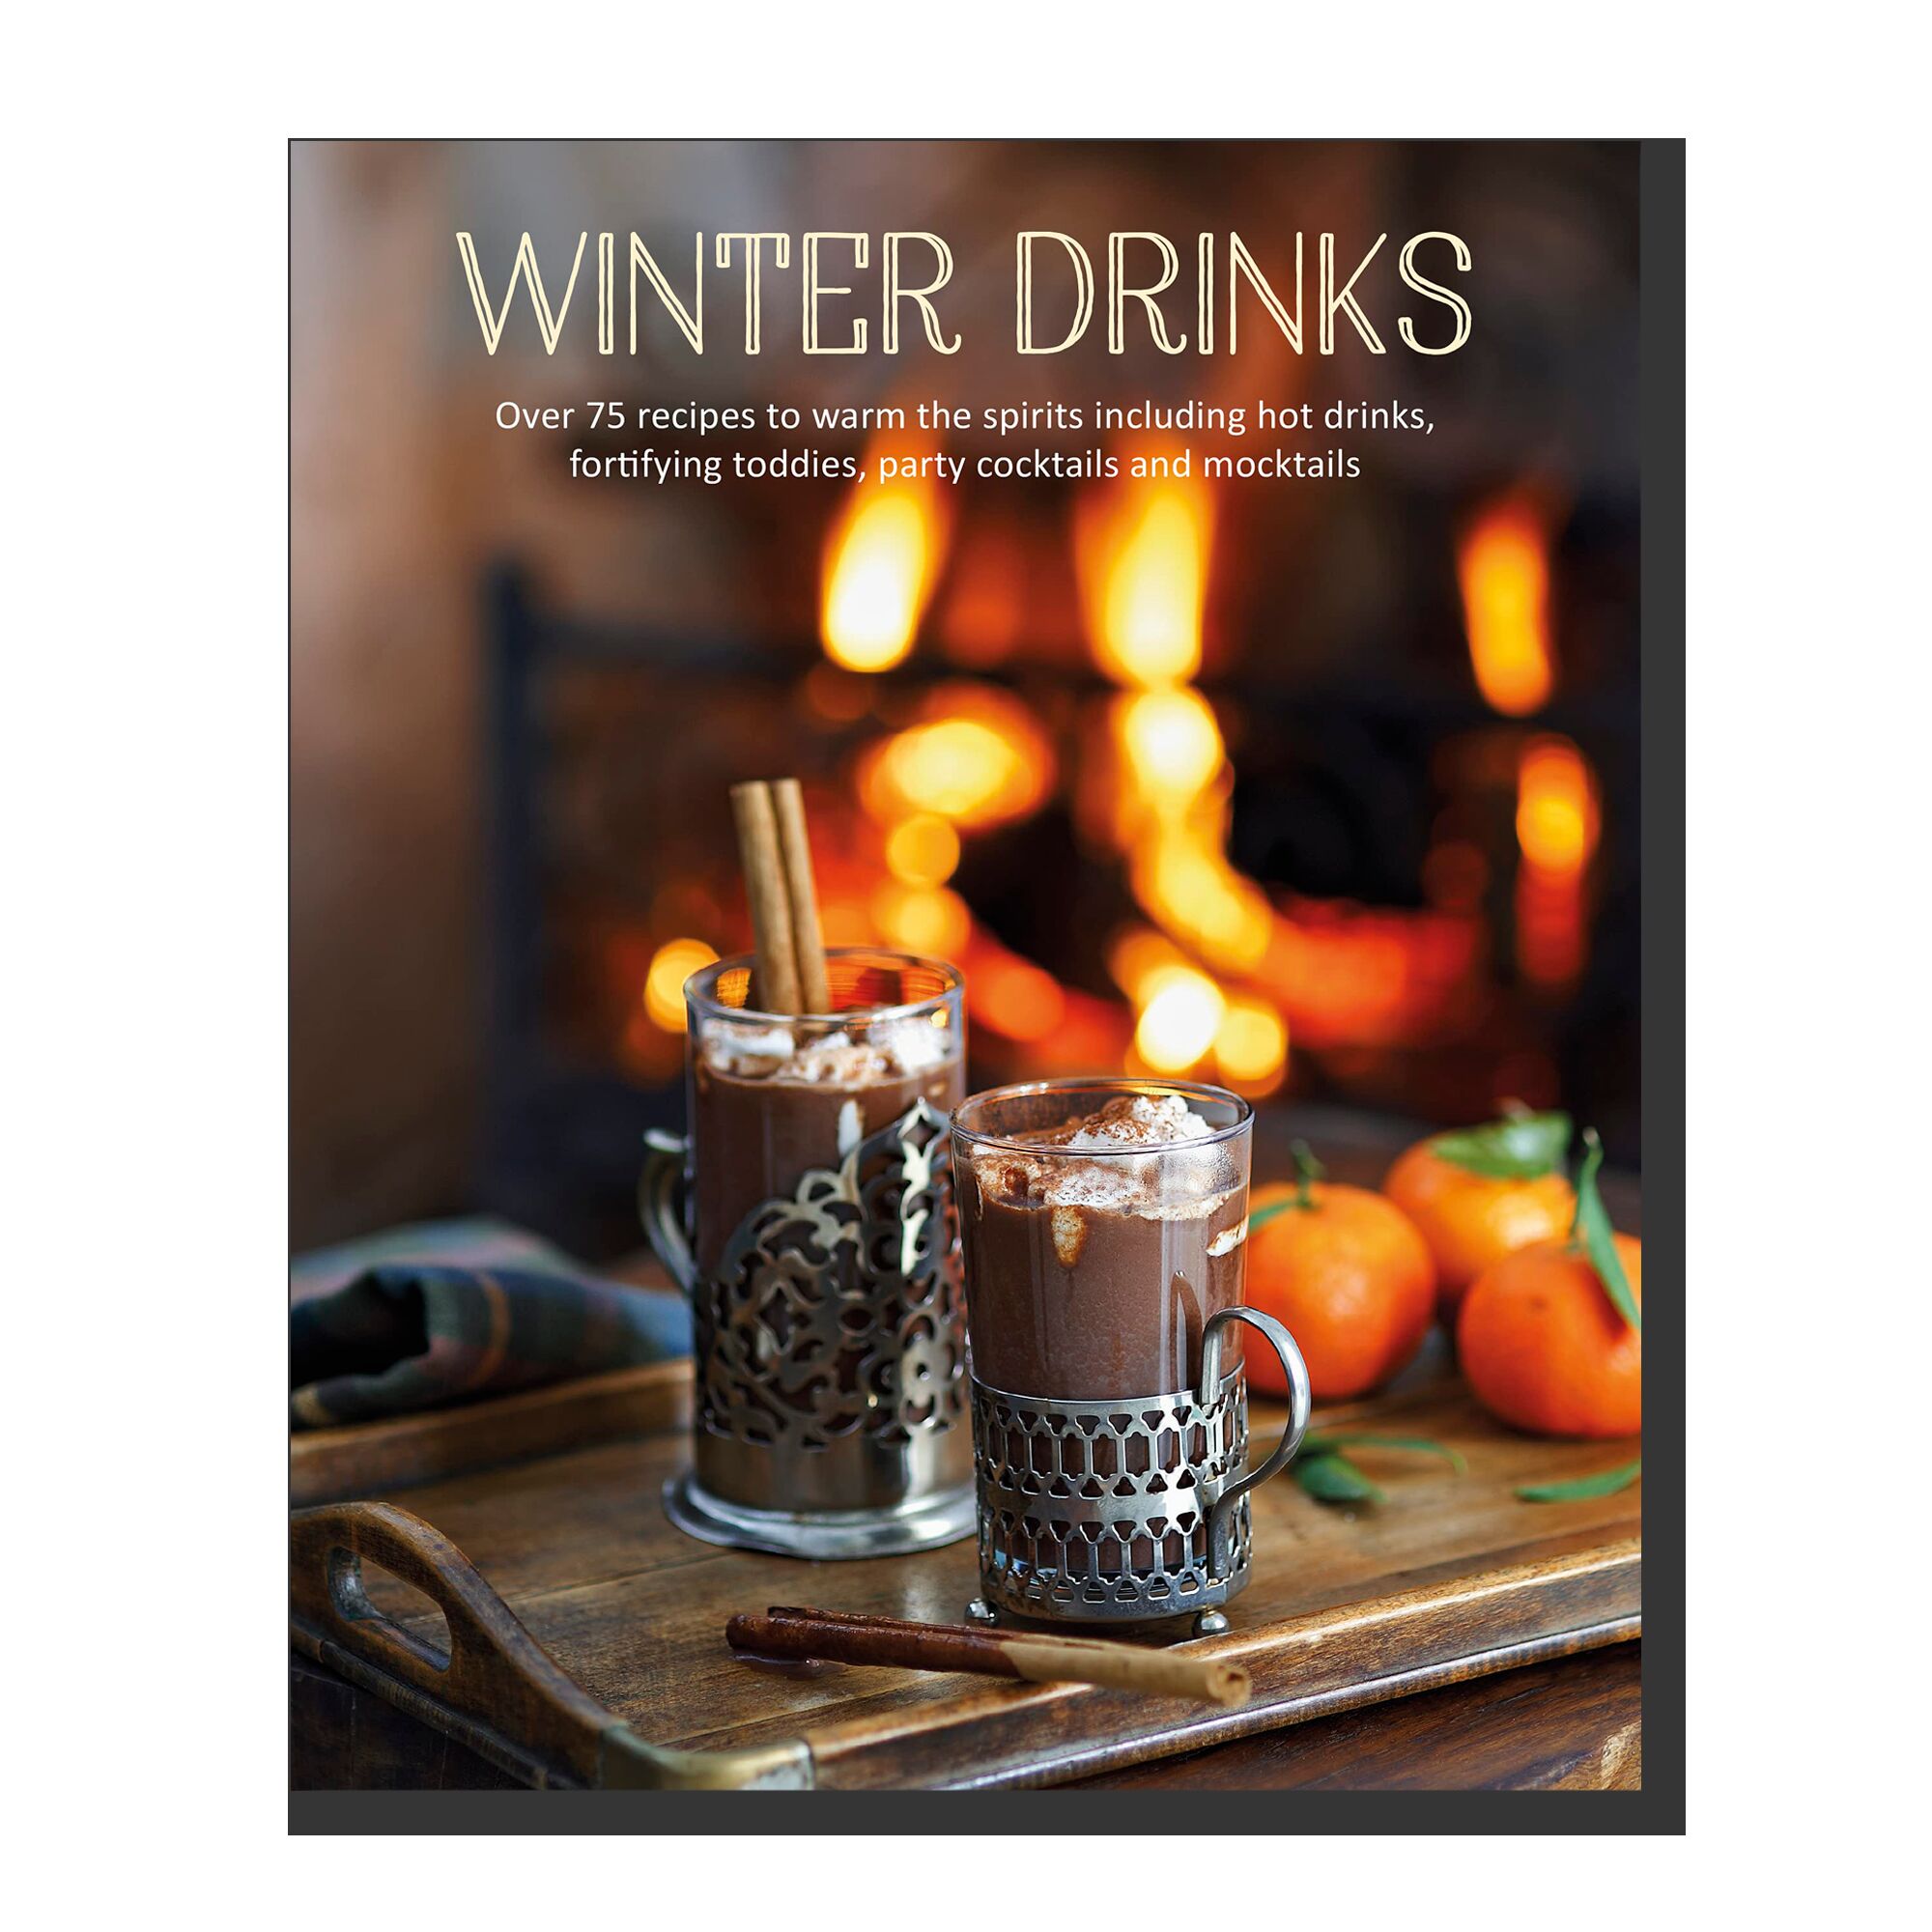 Winter Drinks: Over 75 recipes